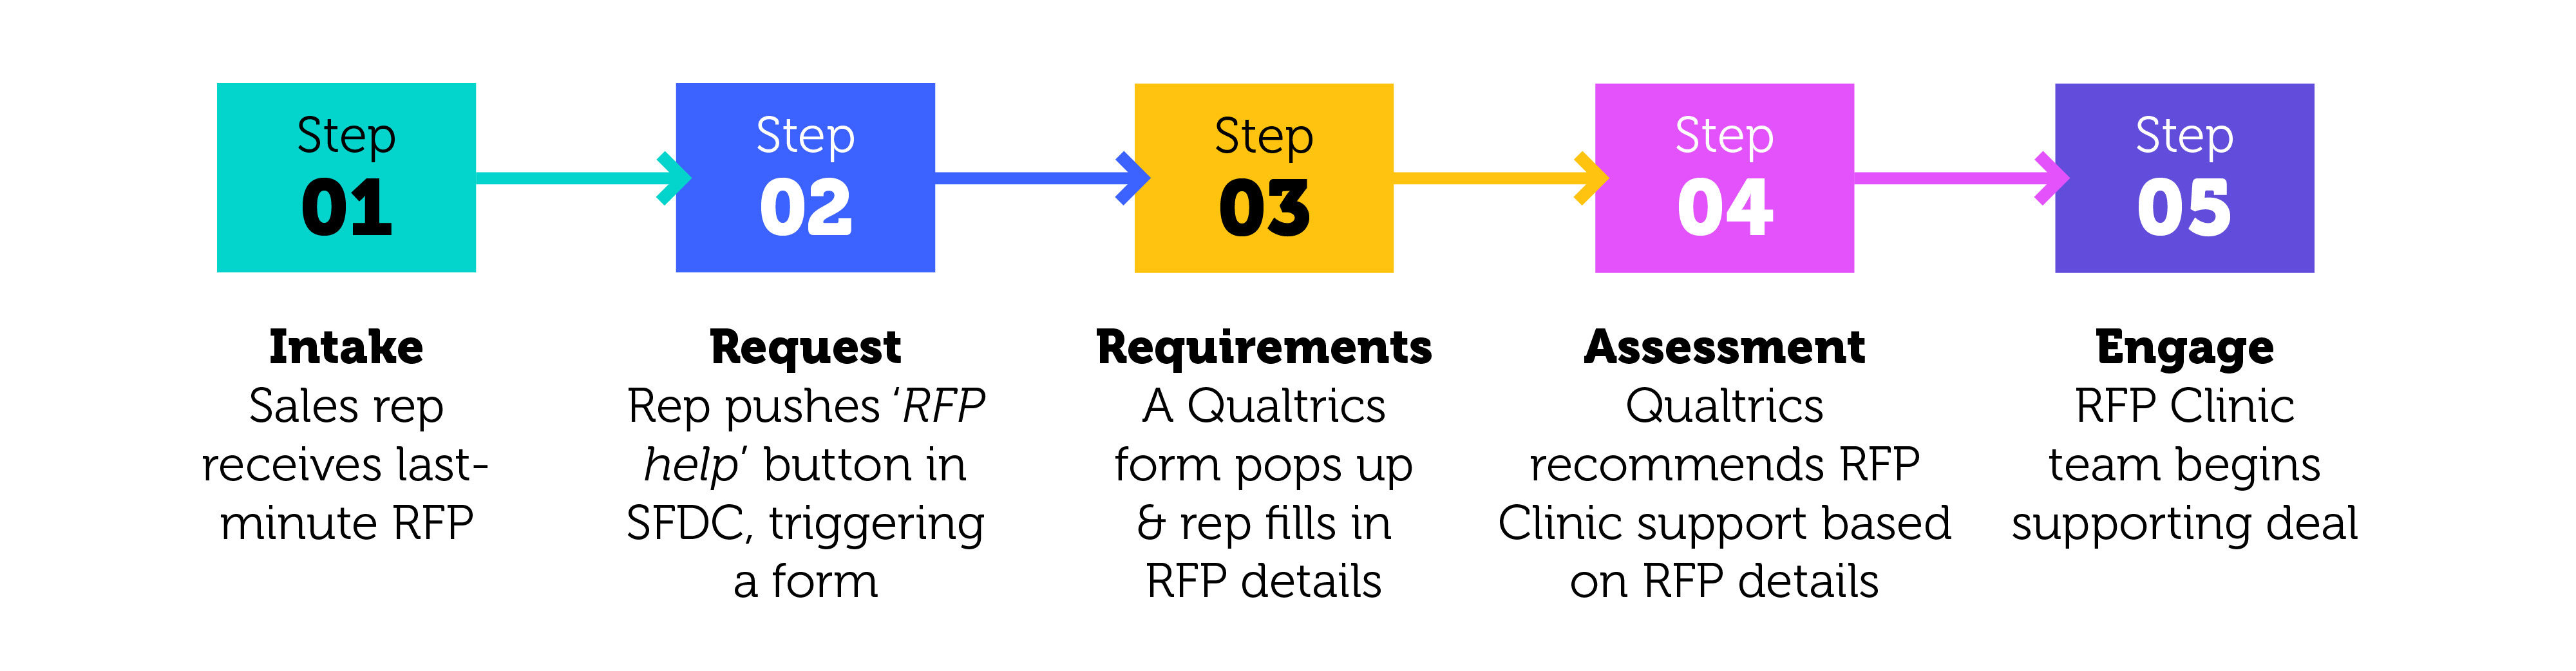 5 step RFP process: Intake, Request, Requirements, Assessment, Engage